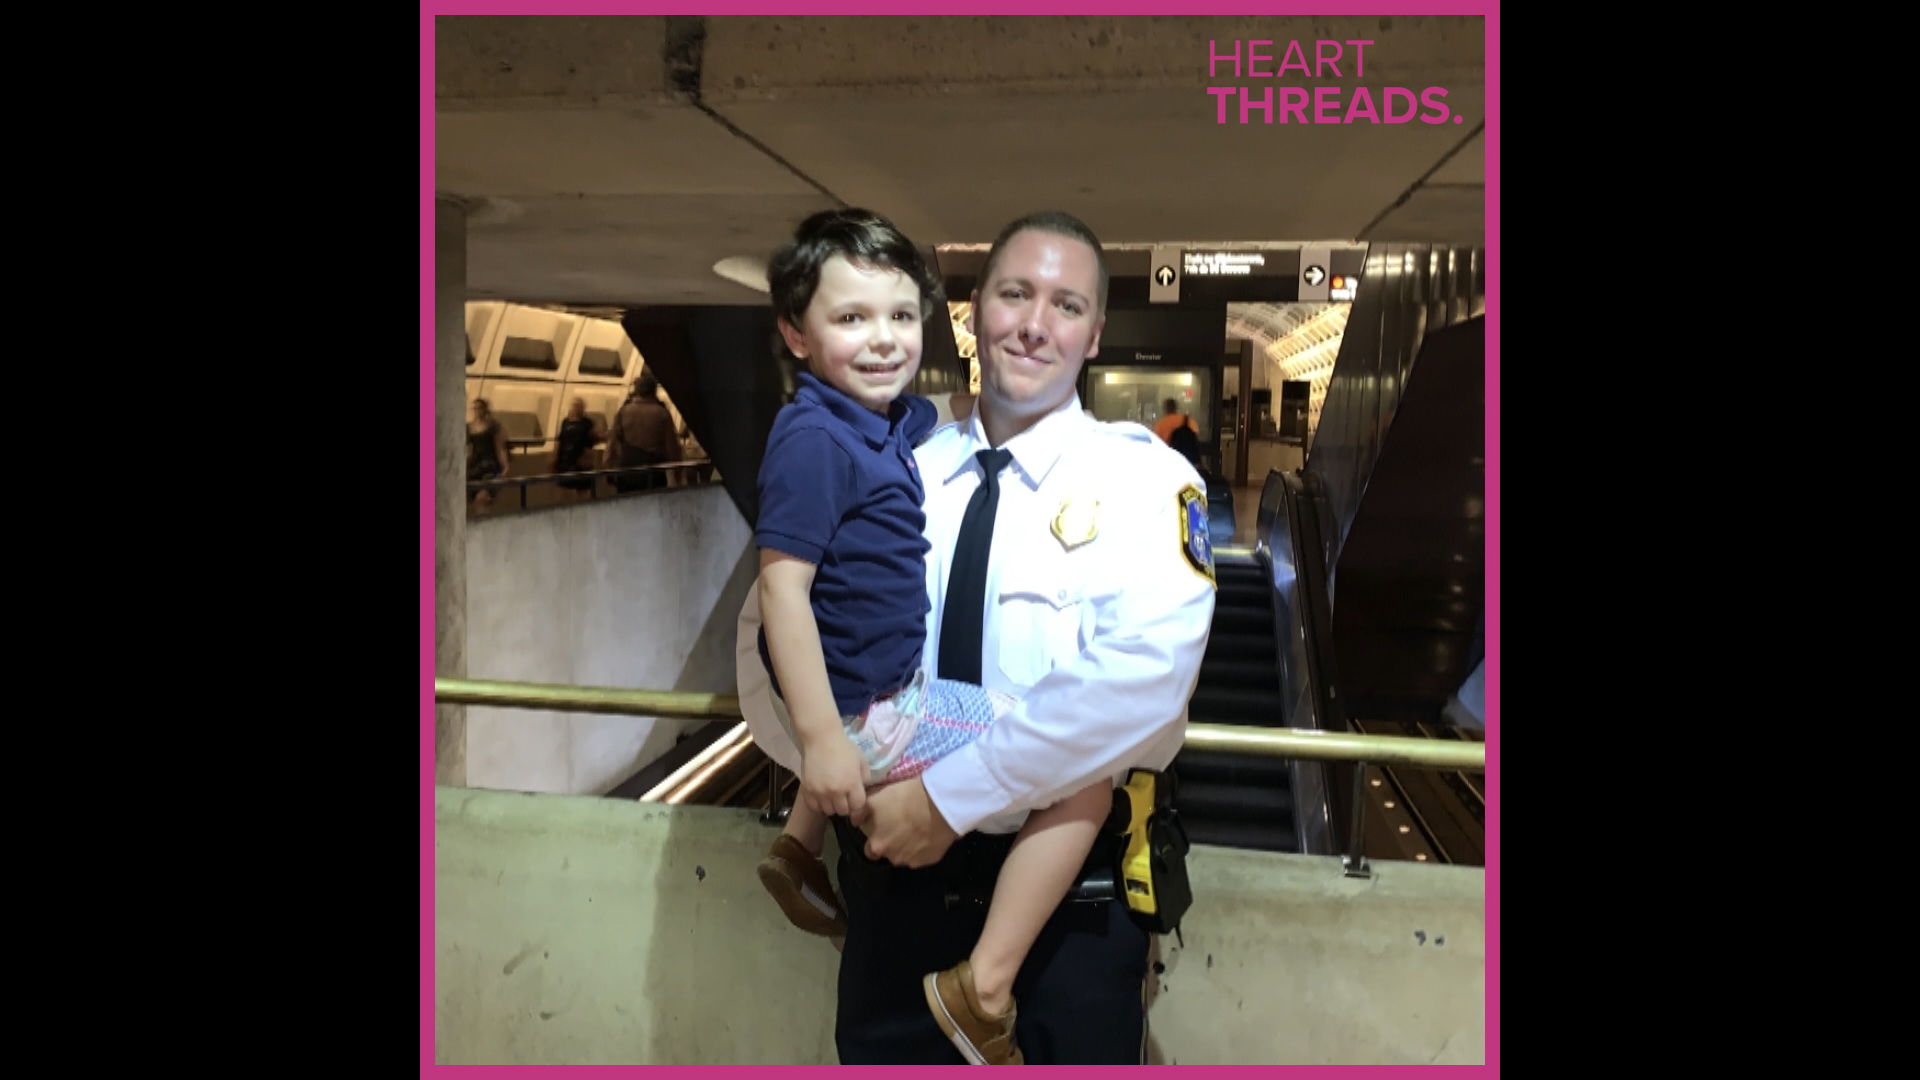 4-year-old Andrew, who has autism, was having a meltdown on the metro. Officer Dominic Case calmed the child and rode the train home with Andrew and his mom.